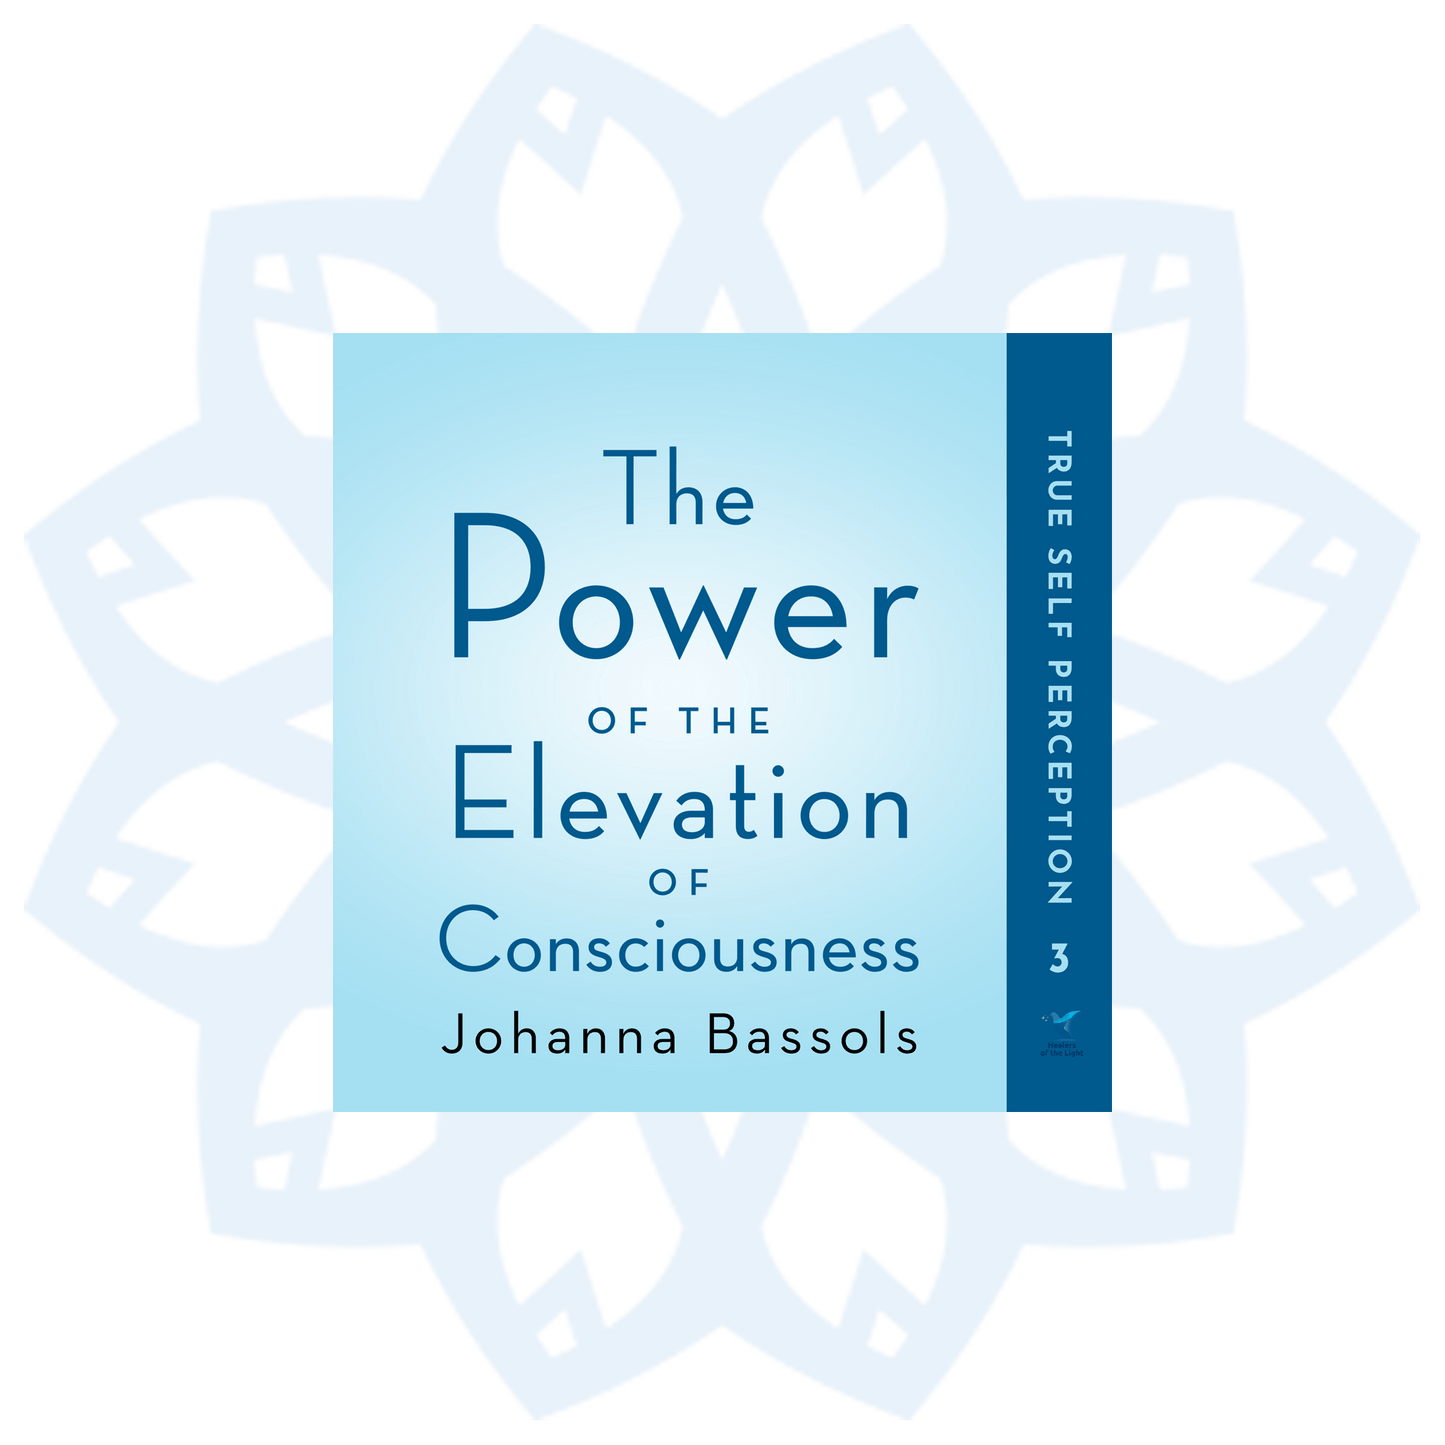 Book 3: The Power of the Elevation of Consciousness, True Self Perception